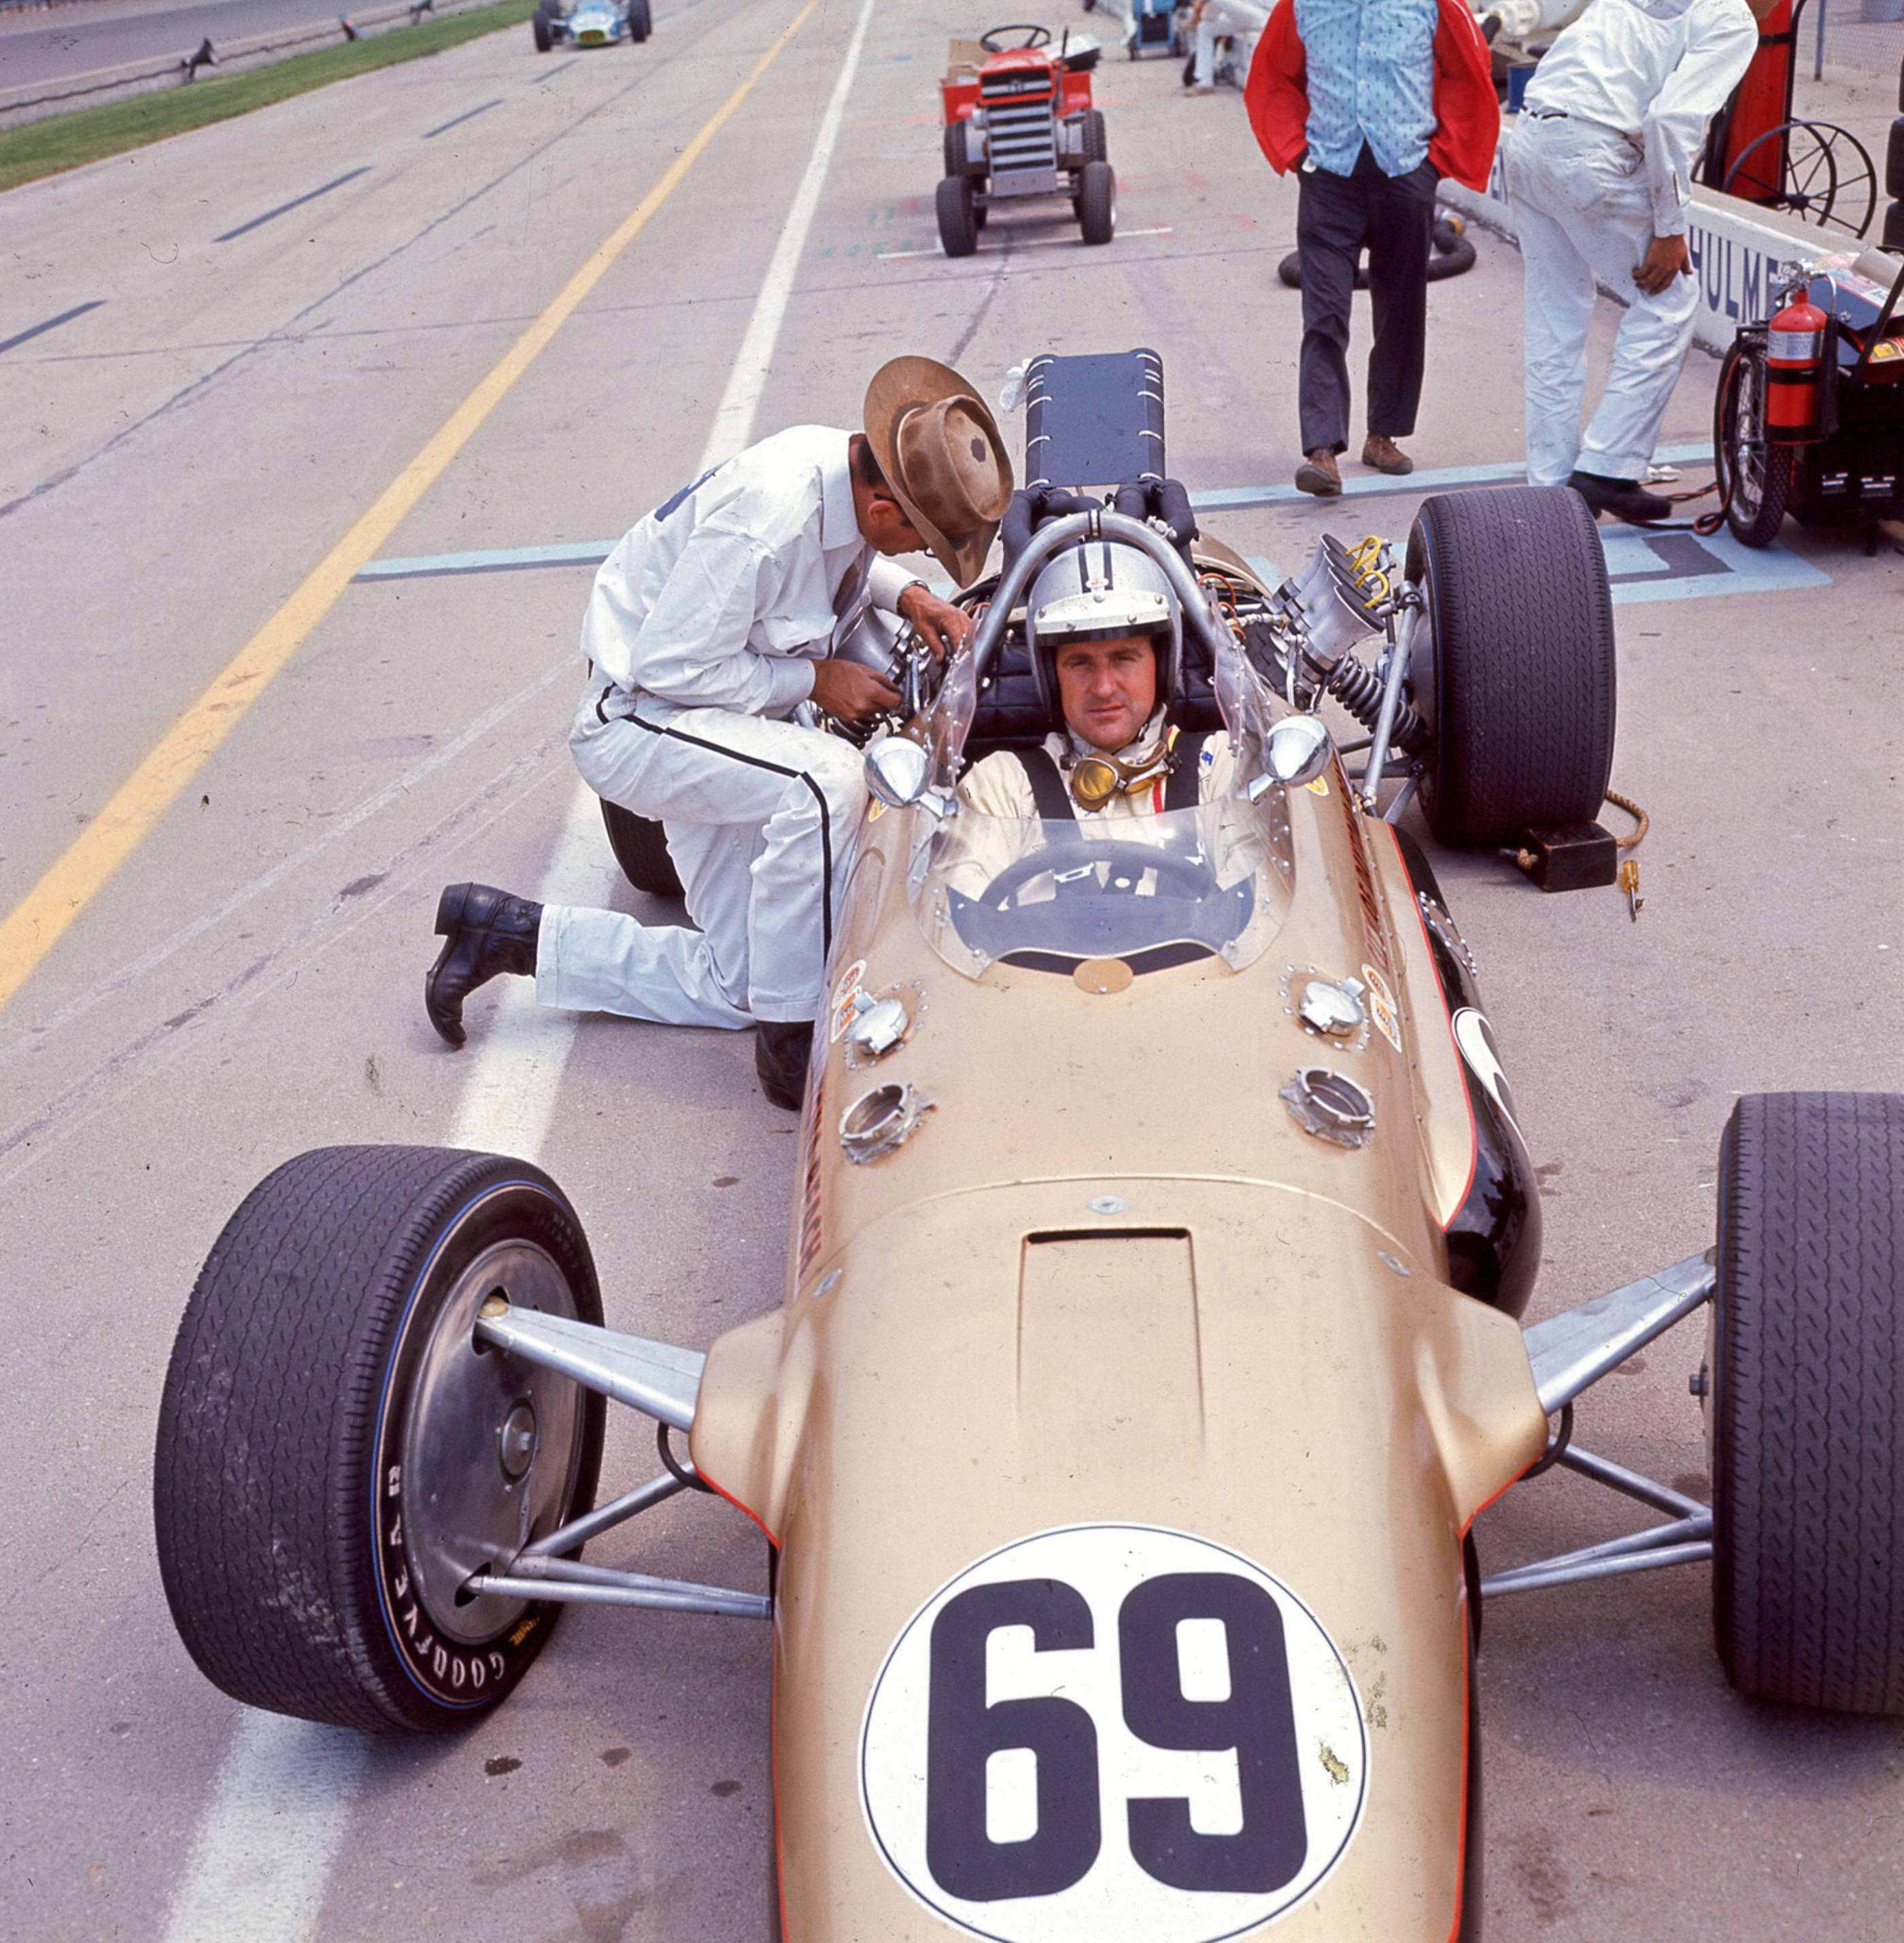 Fifty years before Alonso - Denny Hulme and Smokey Yunick with their Eagle-Ford, Indy ‘500’ - Difference is that Denny did Indy AND the Monaco GP, which he won!